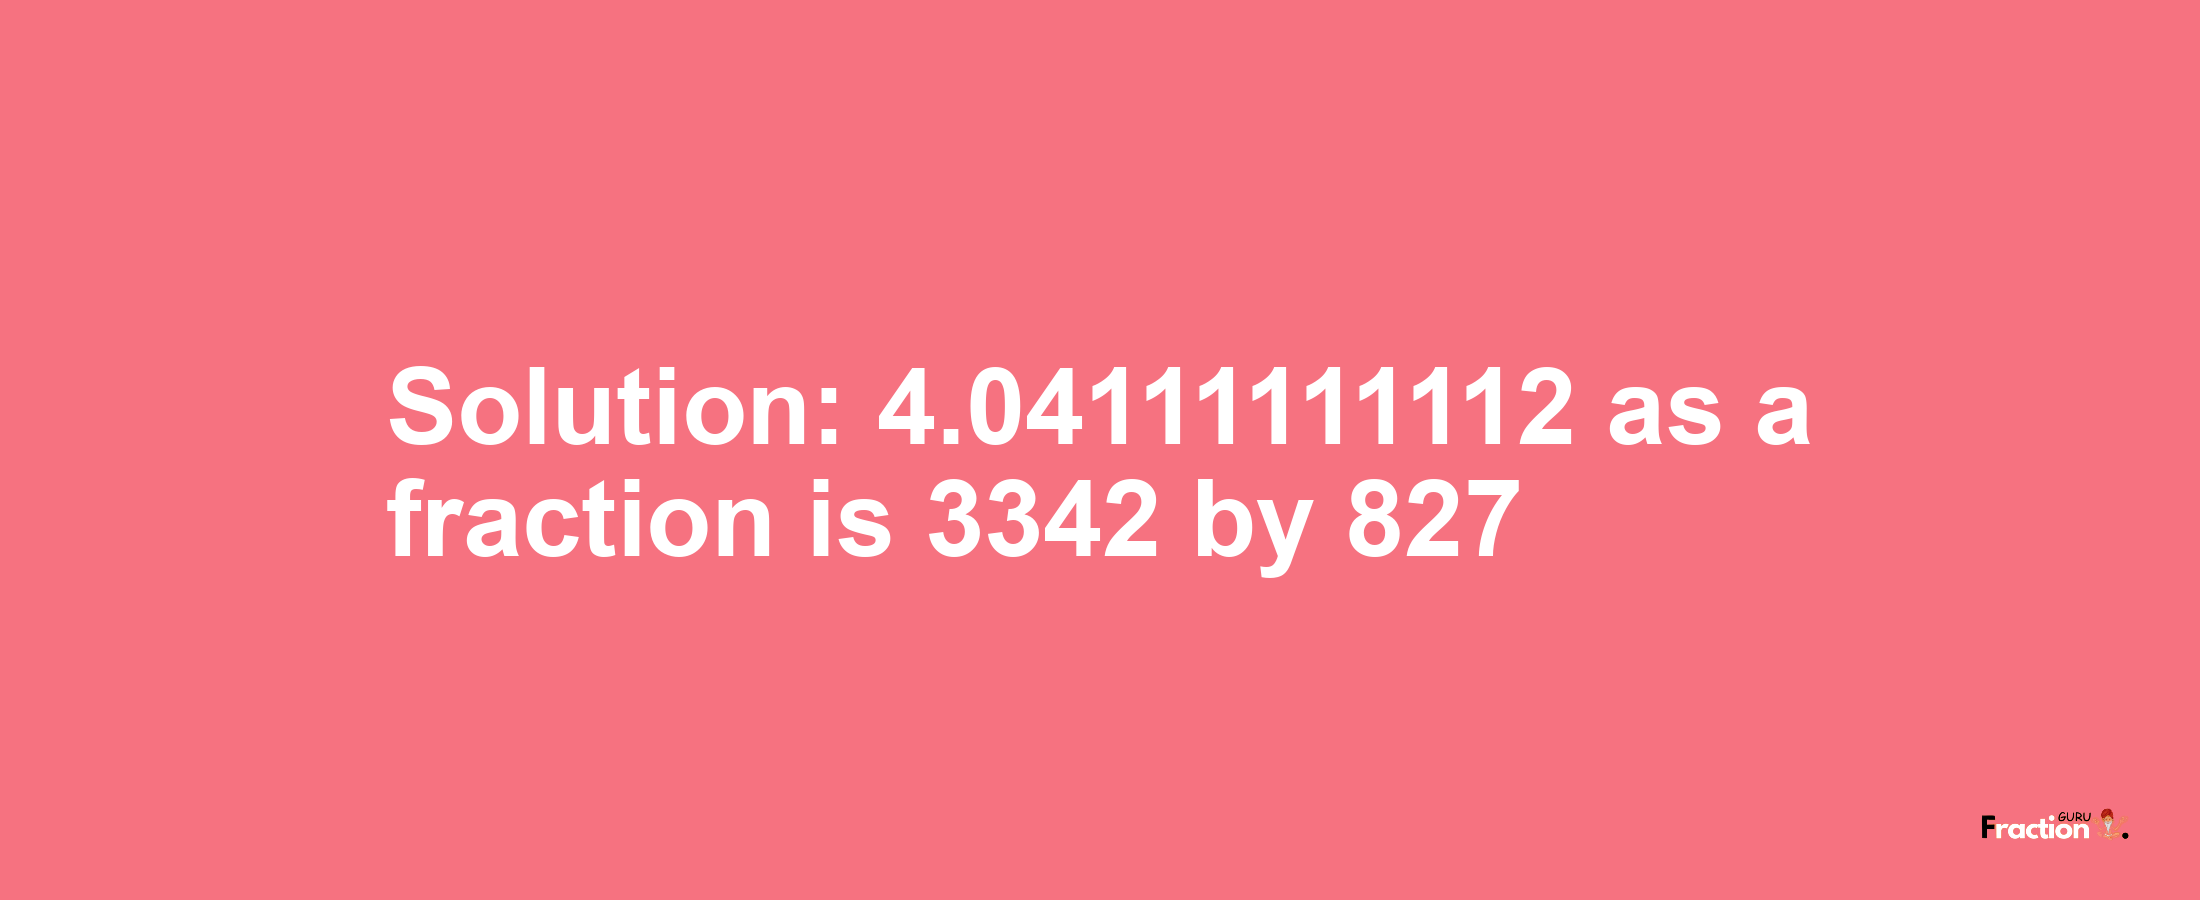 Solution:4.04111111112 as a fraction is 3342/827